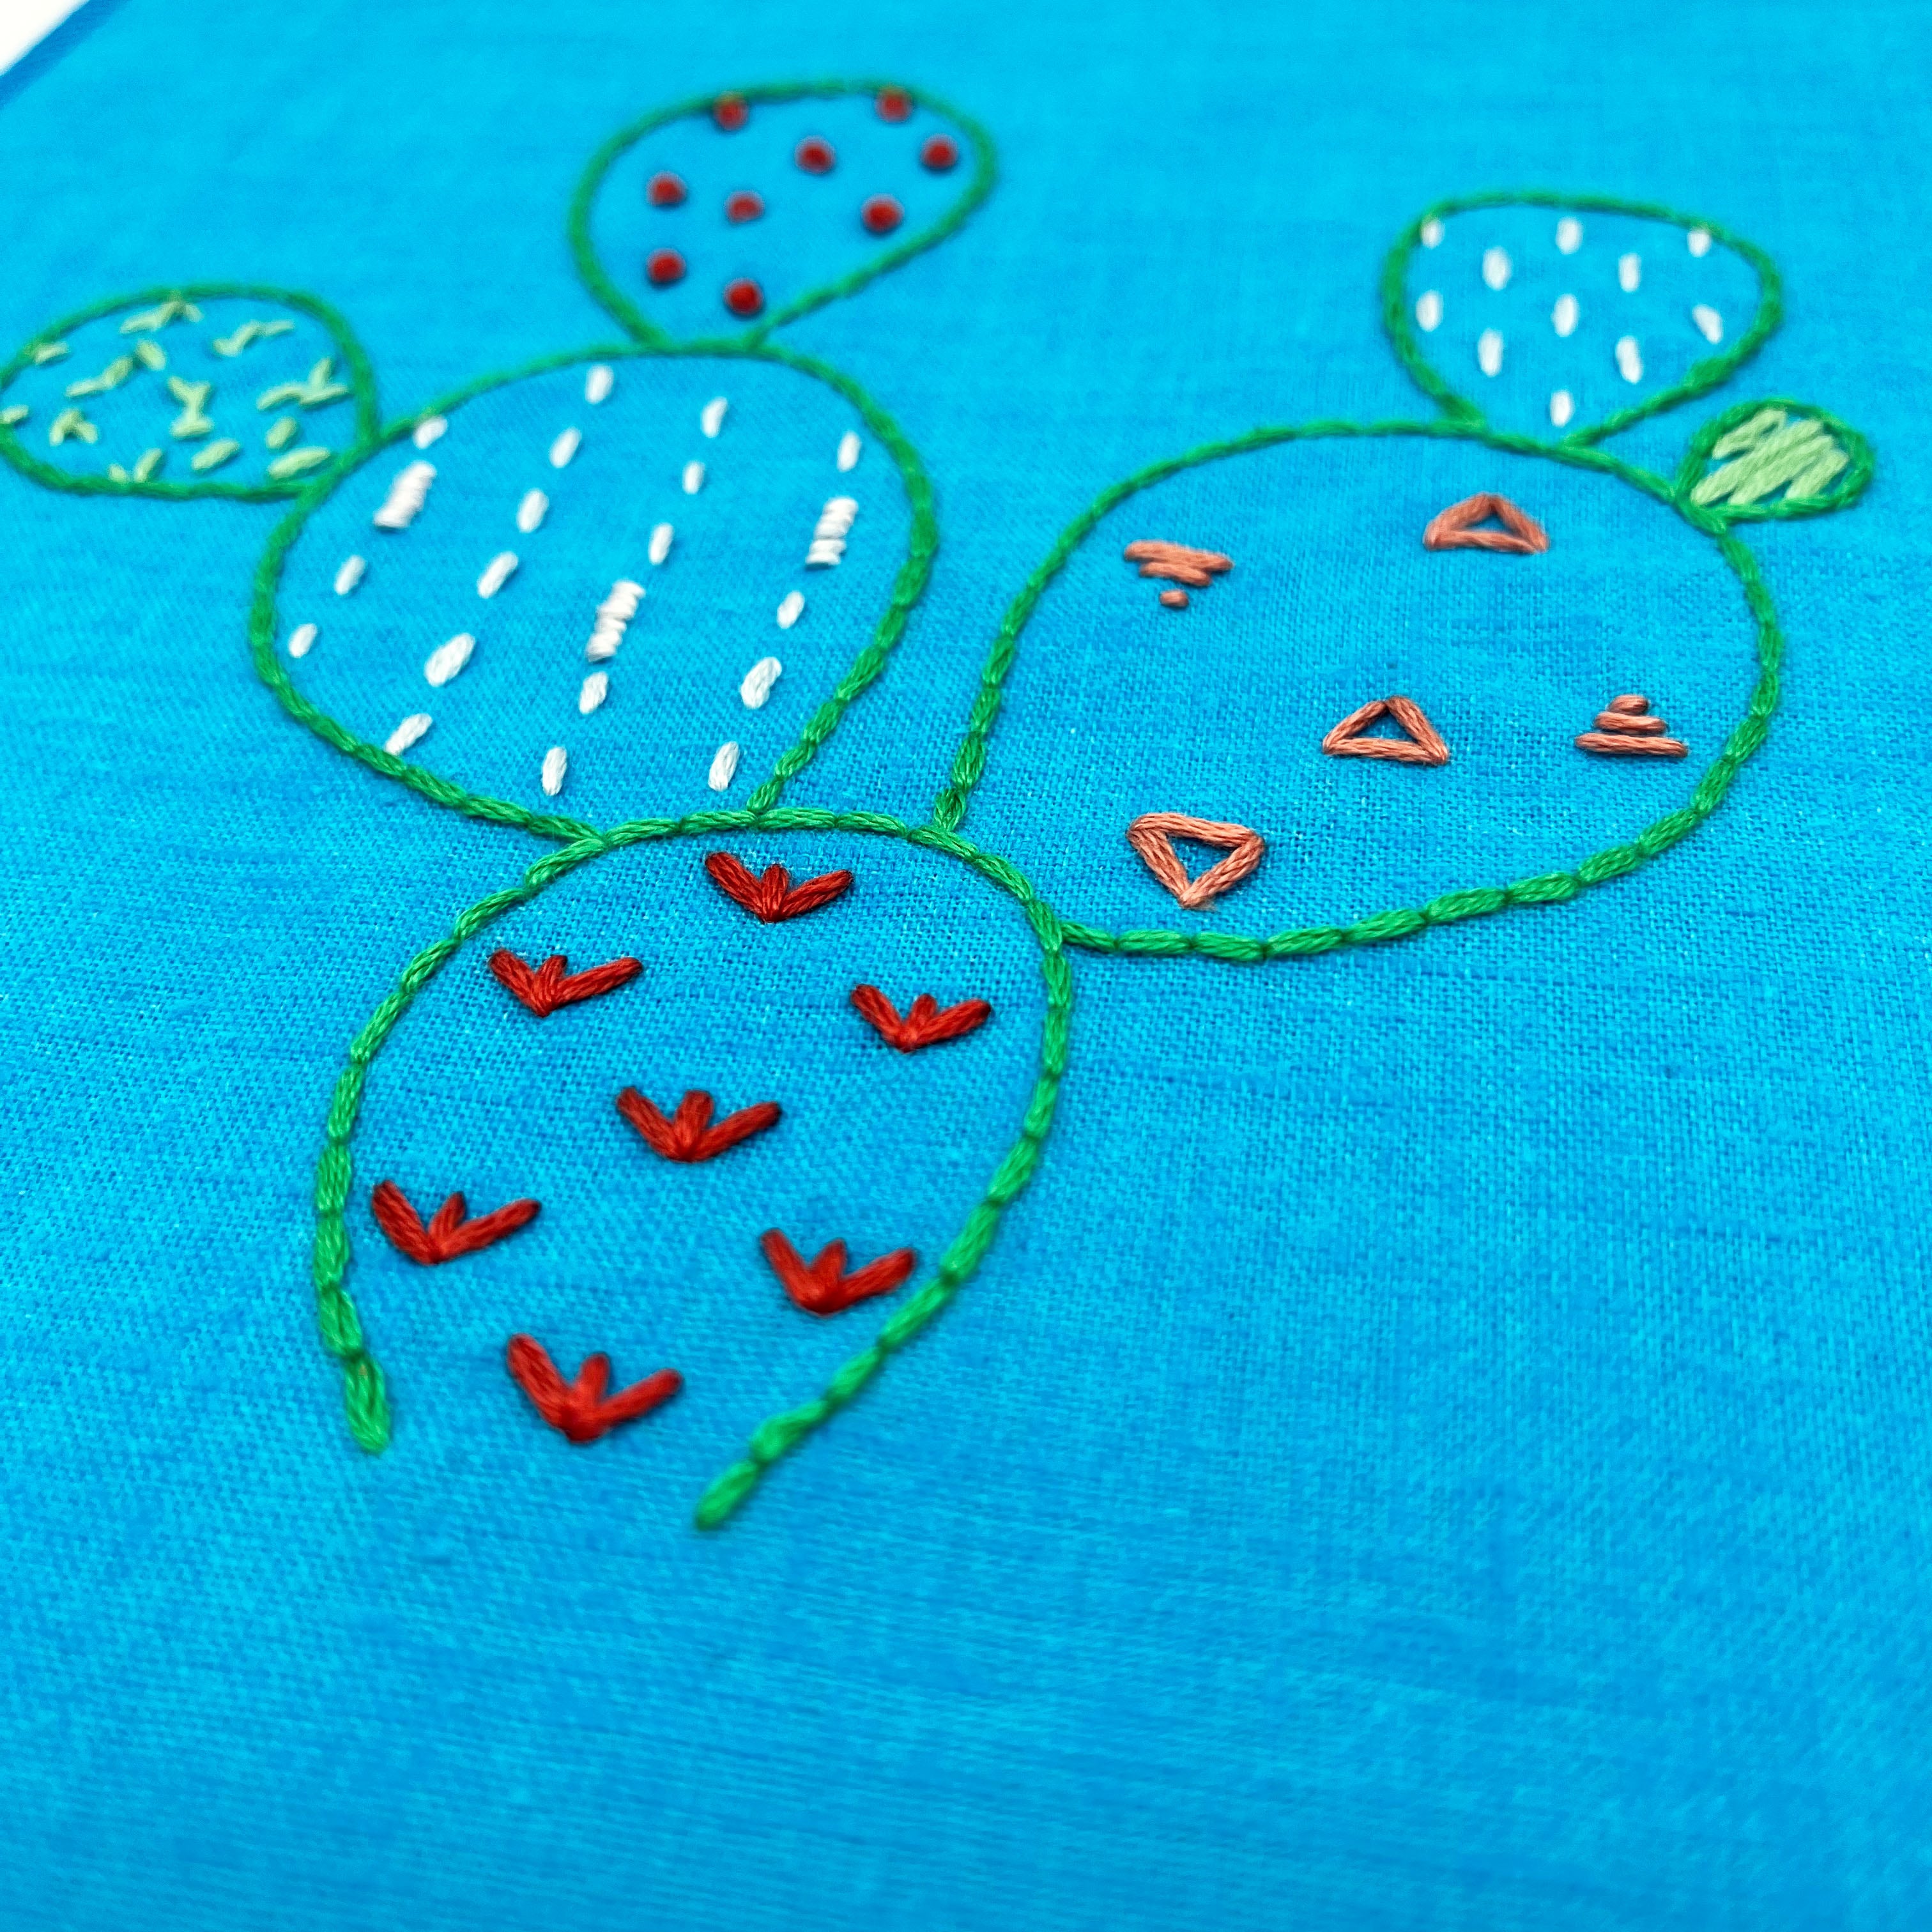 Wall Hanging- Hand Embroidered Prickly Pear Cactus